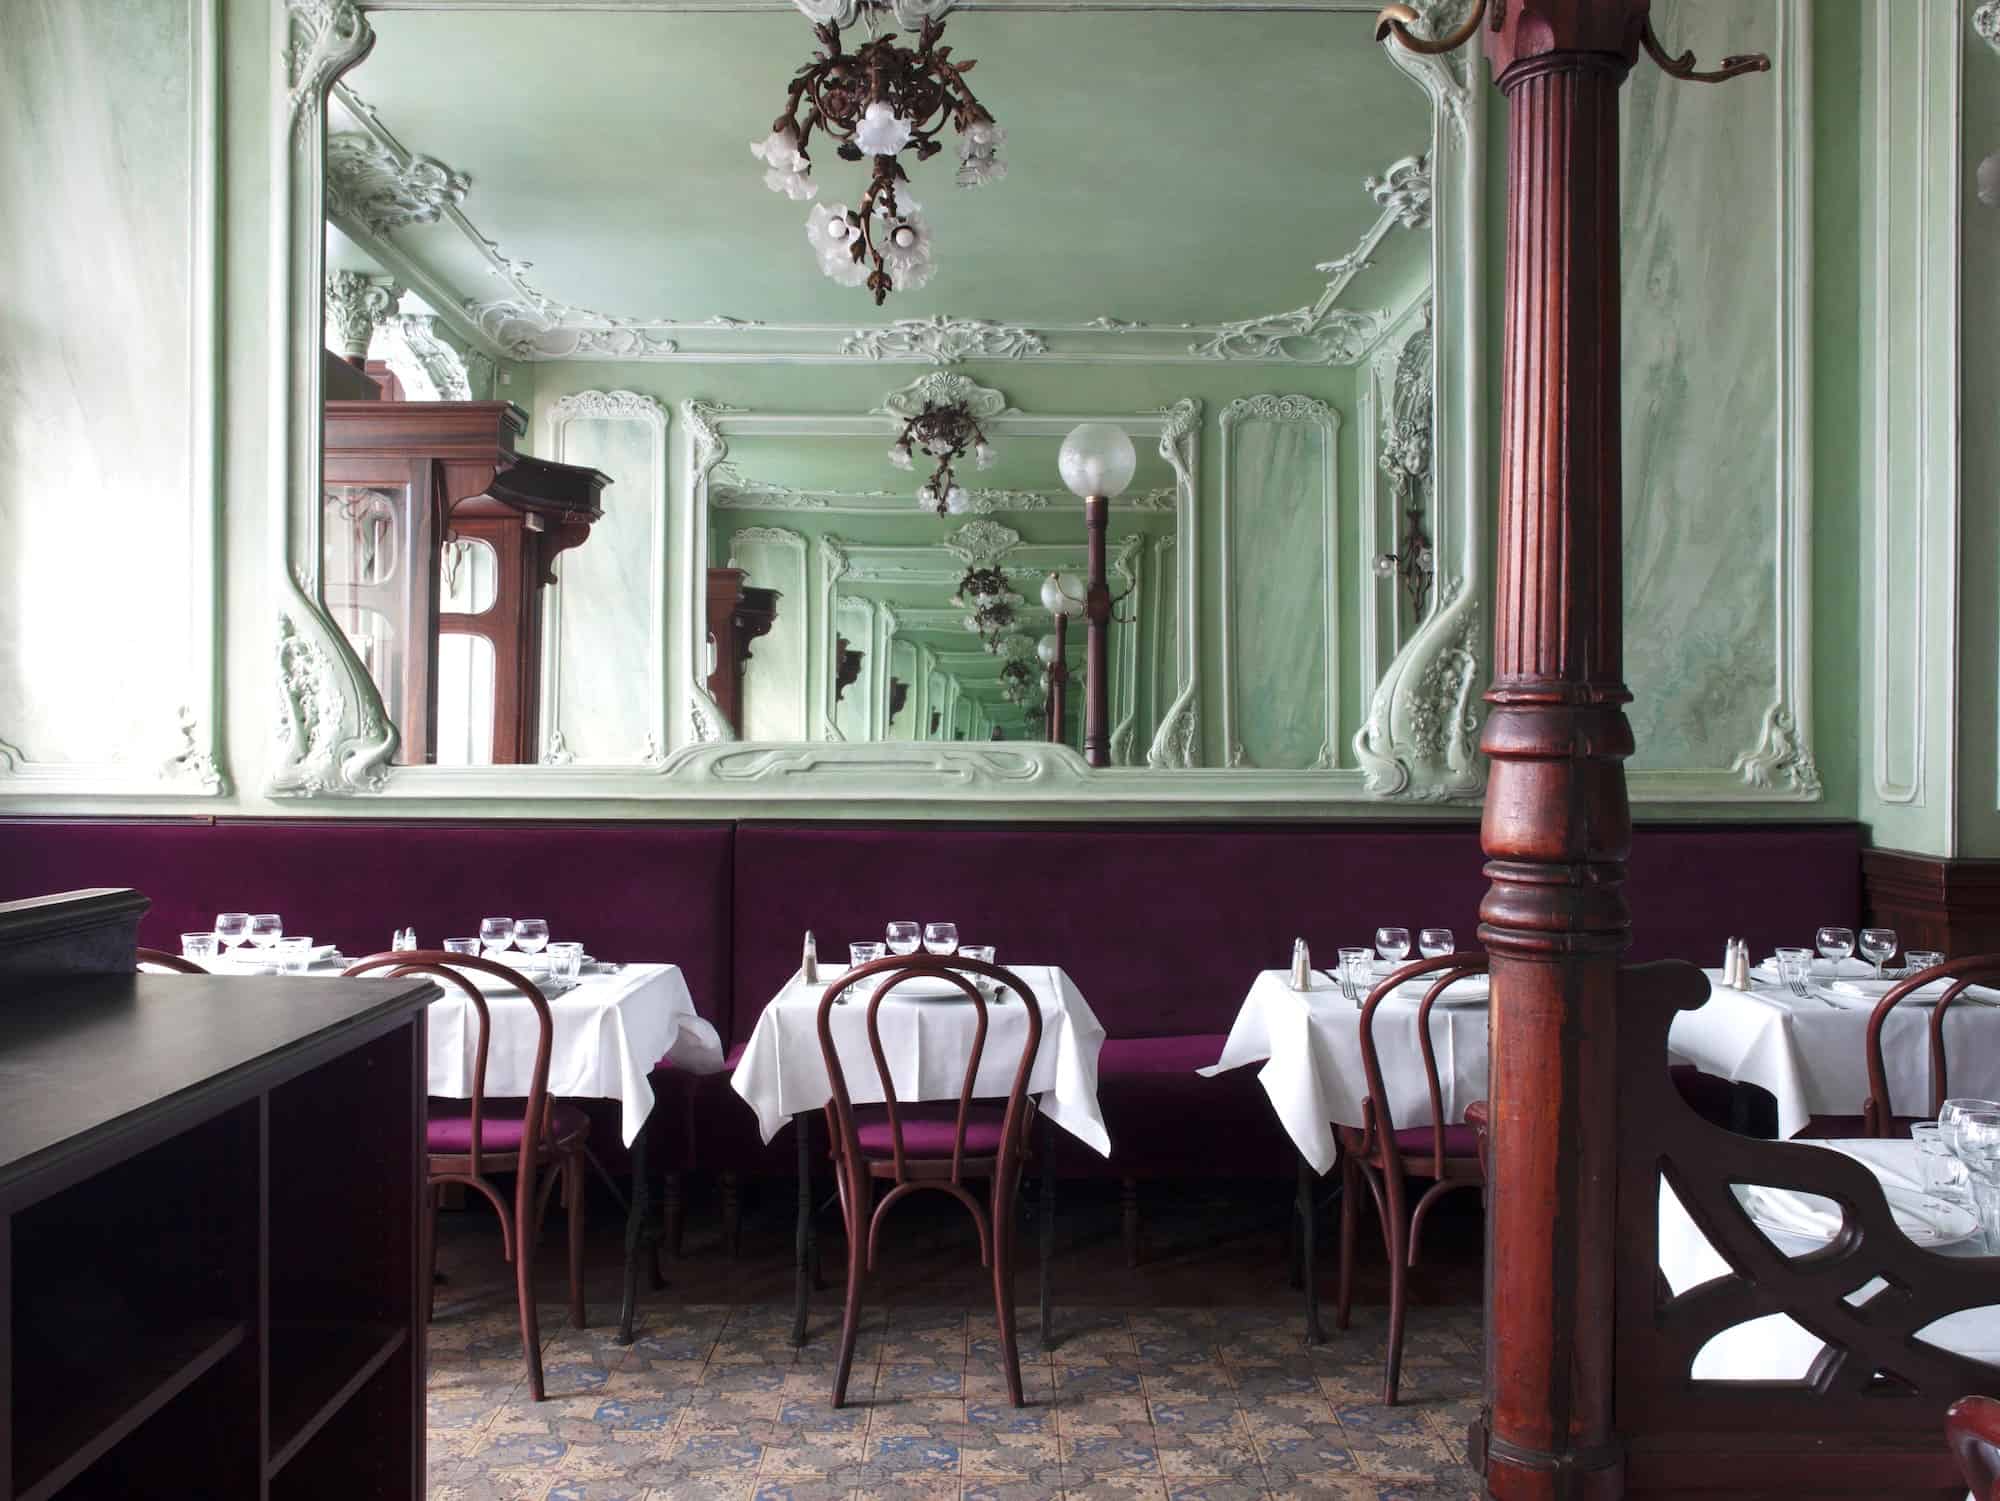 The art nouveau interior of Bouillon Julien restaurant in Paris. Pale green walls with a large mirror in the middle, chandeliers, maroon bench seat and chairs with tables with white table cloths and wine glasses.